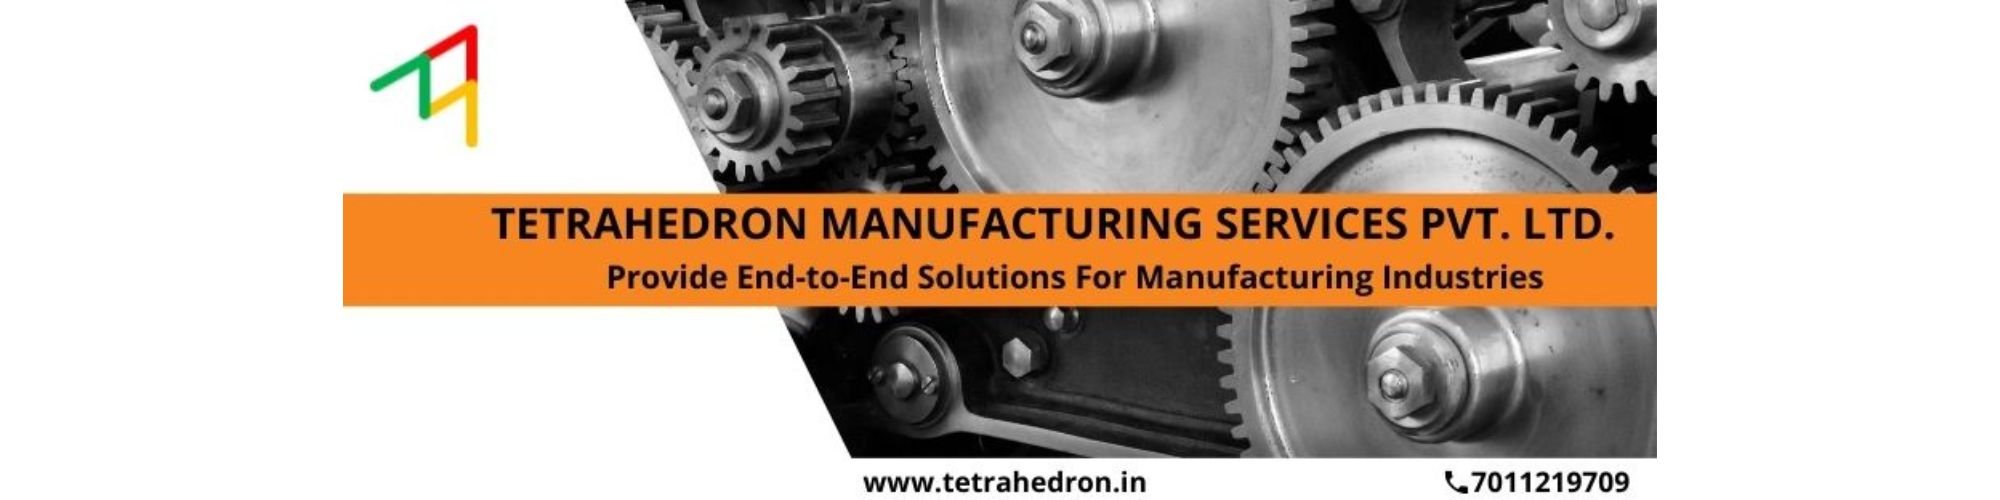 Tetrahedron Manufacturing Services cover